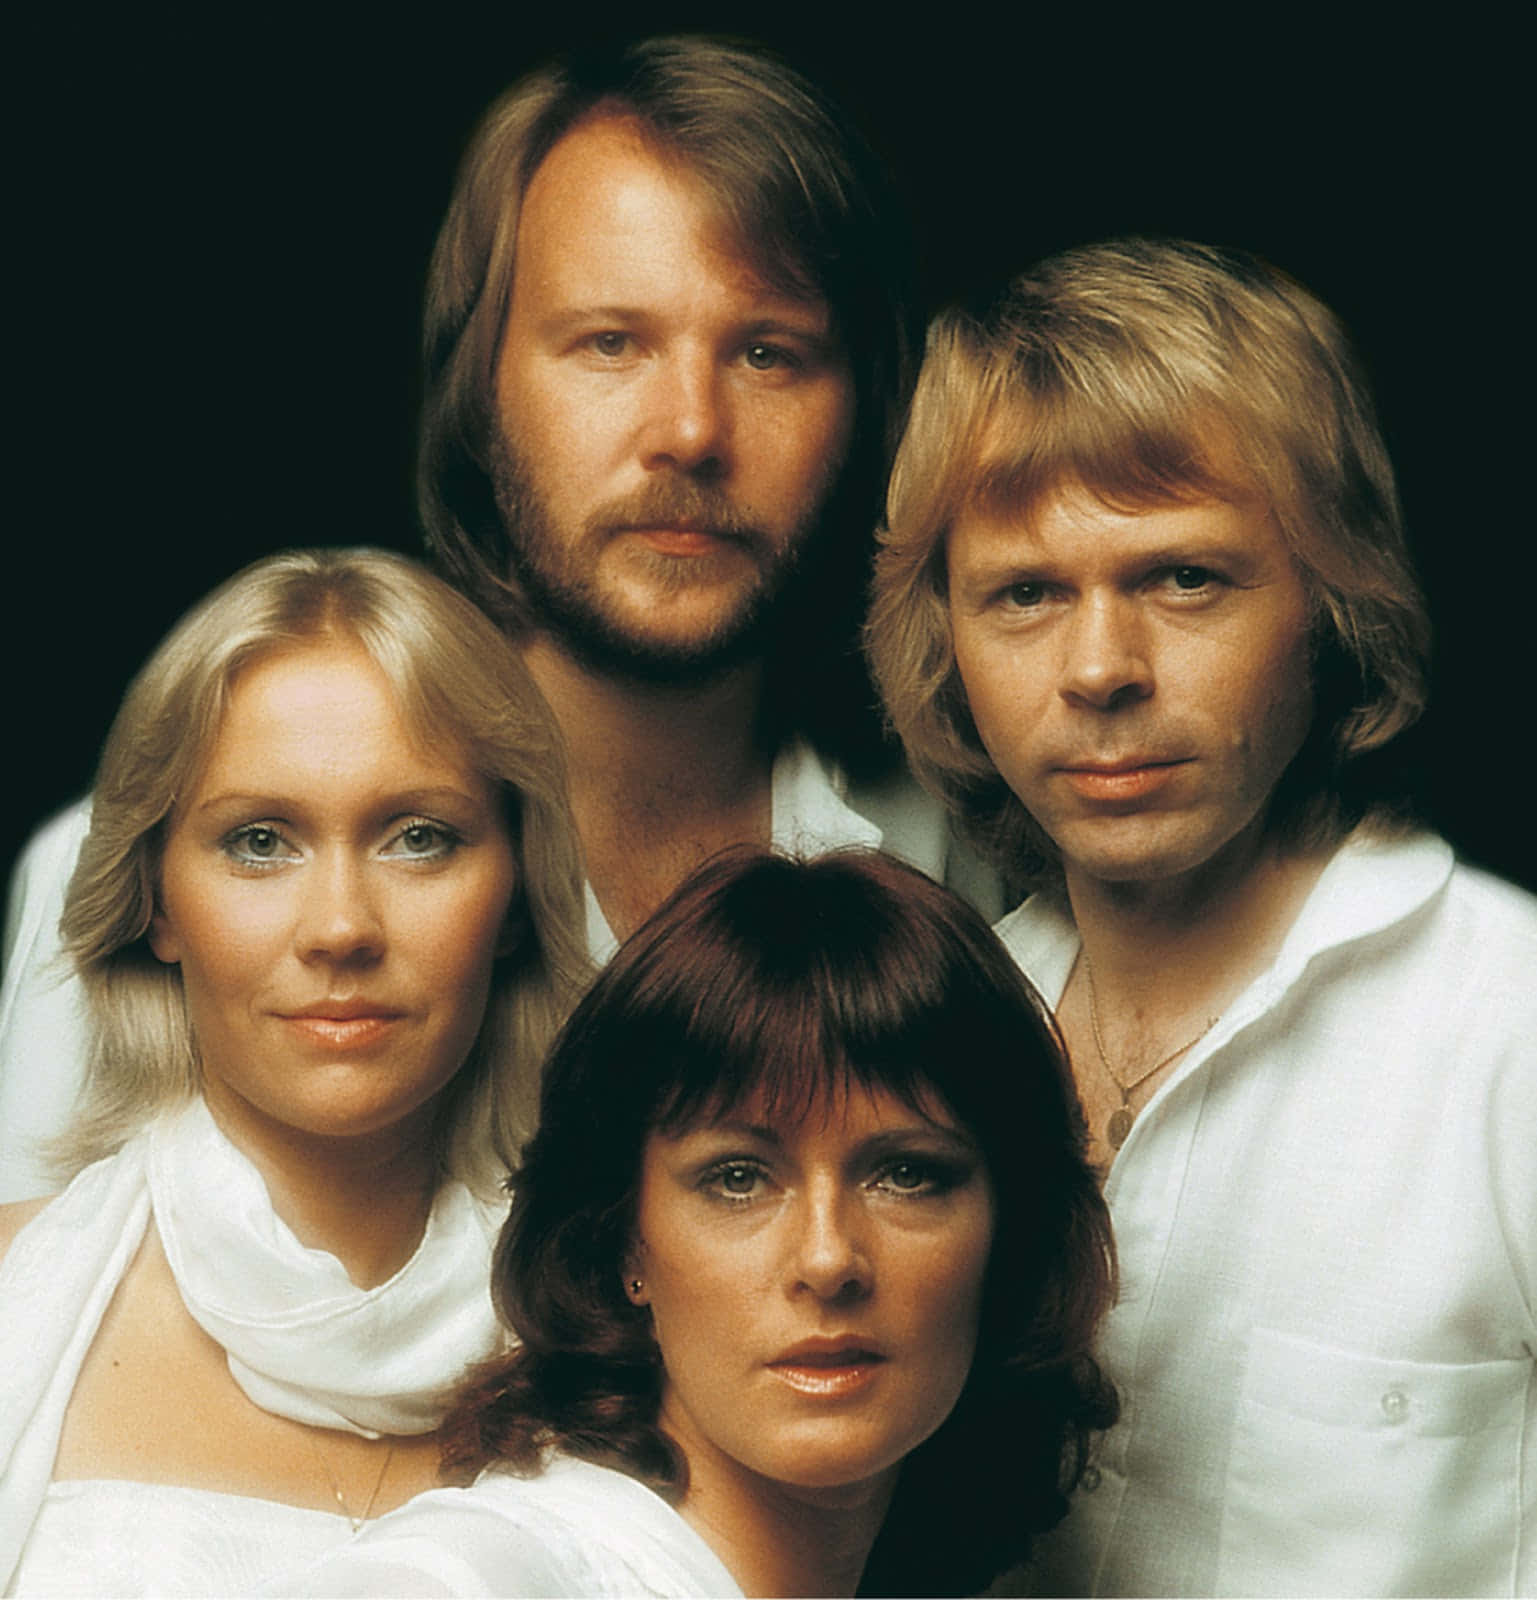 ABBA performing their beloved hit song "Dancing Queen"